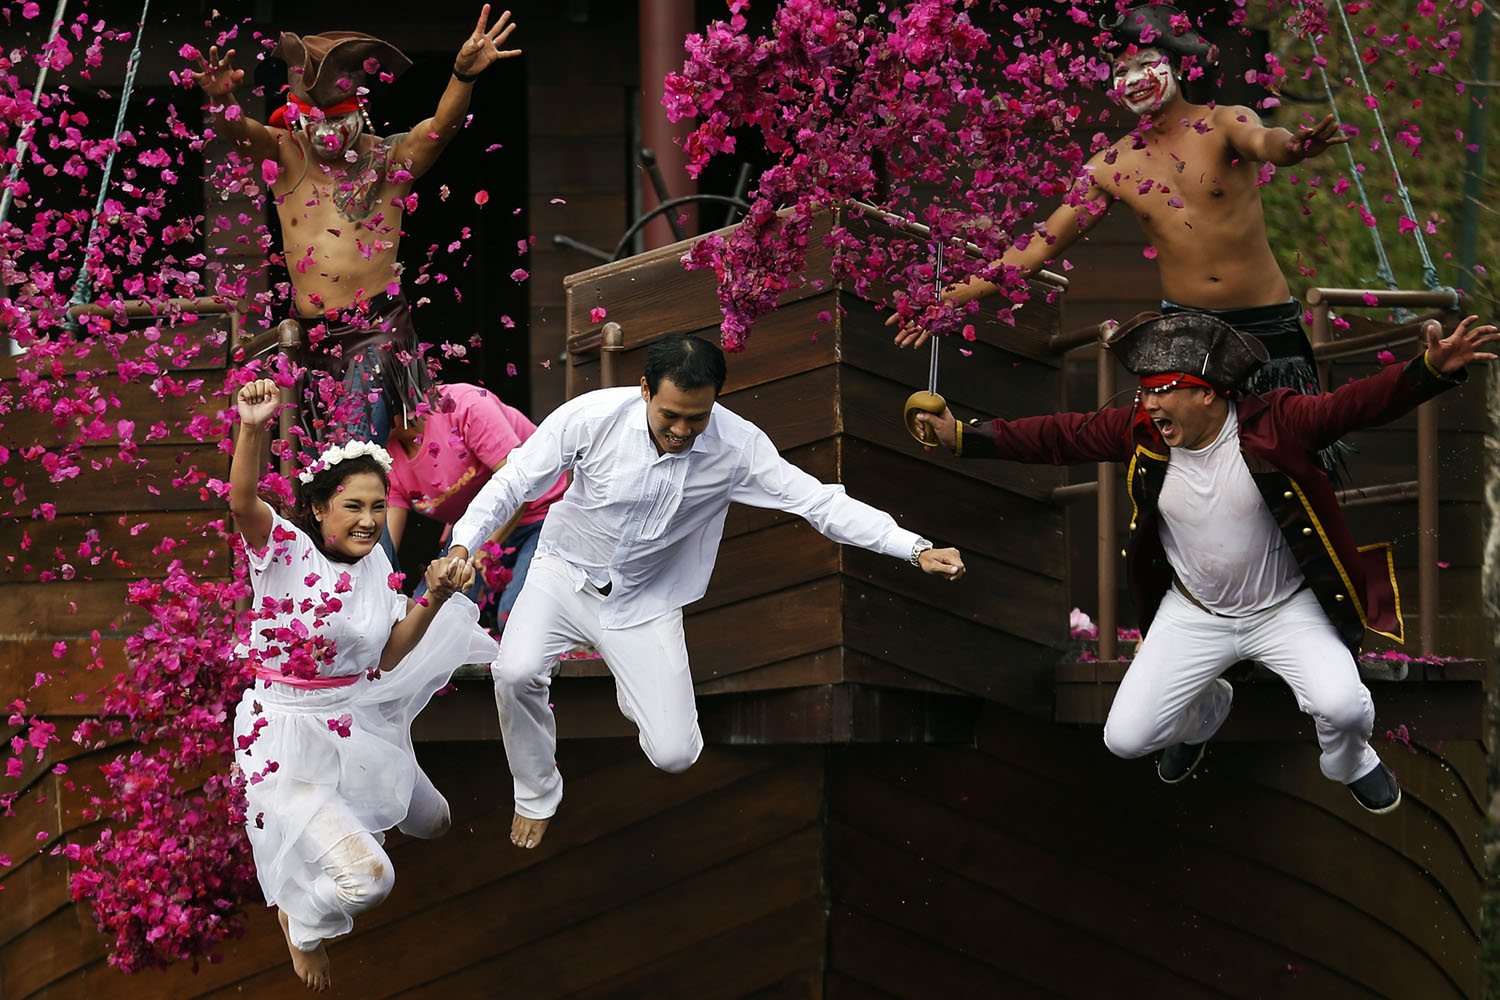 Feb. 13, 2014. Groom Roongroj Walailuk and bride Vina Wichan jump into the pond as they are chased by men dressed as pirates during a wedding ceremony ahead of Valentine's Day in Prachin Buri province, east of Bangkok.